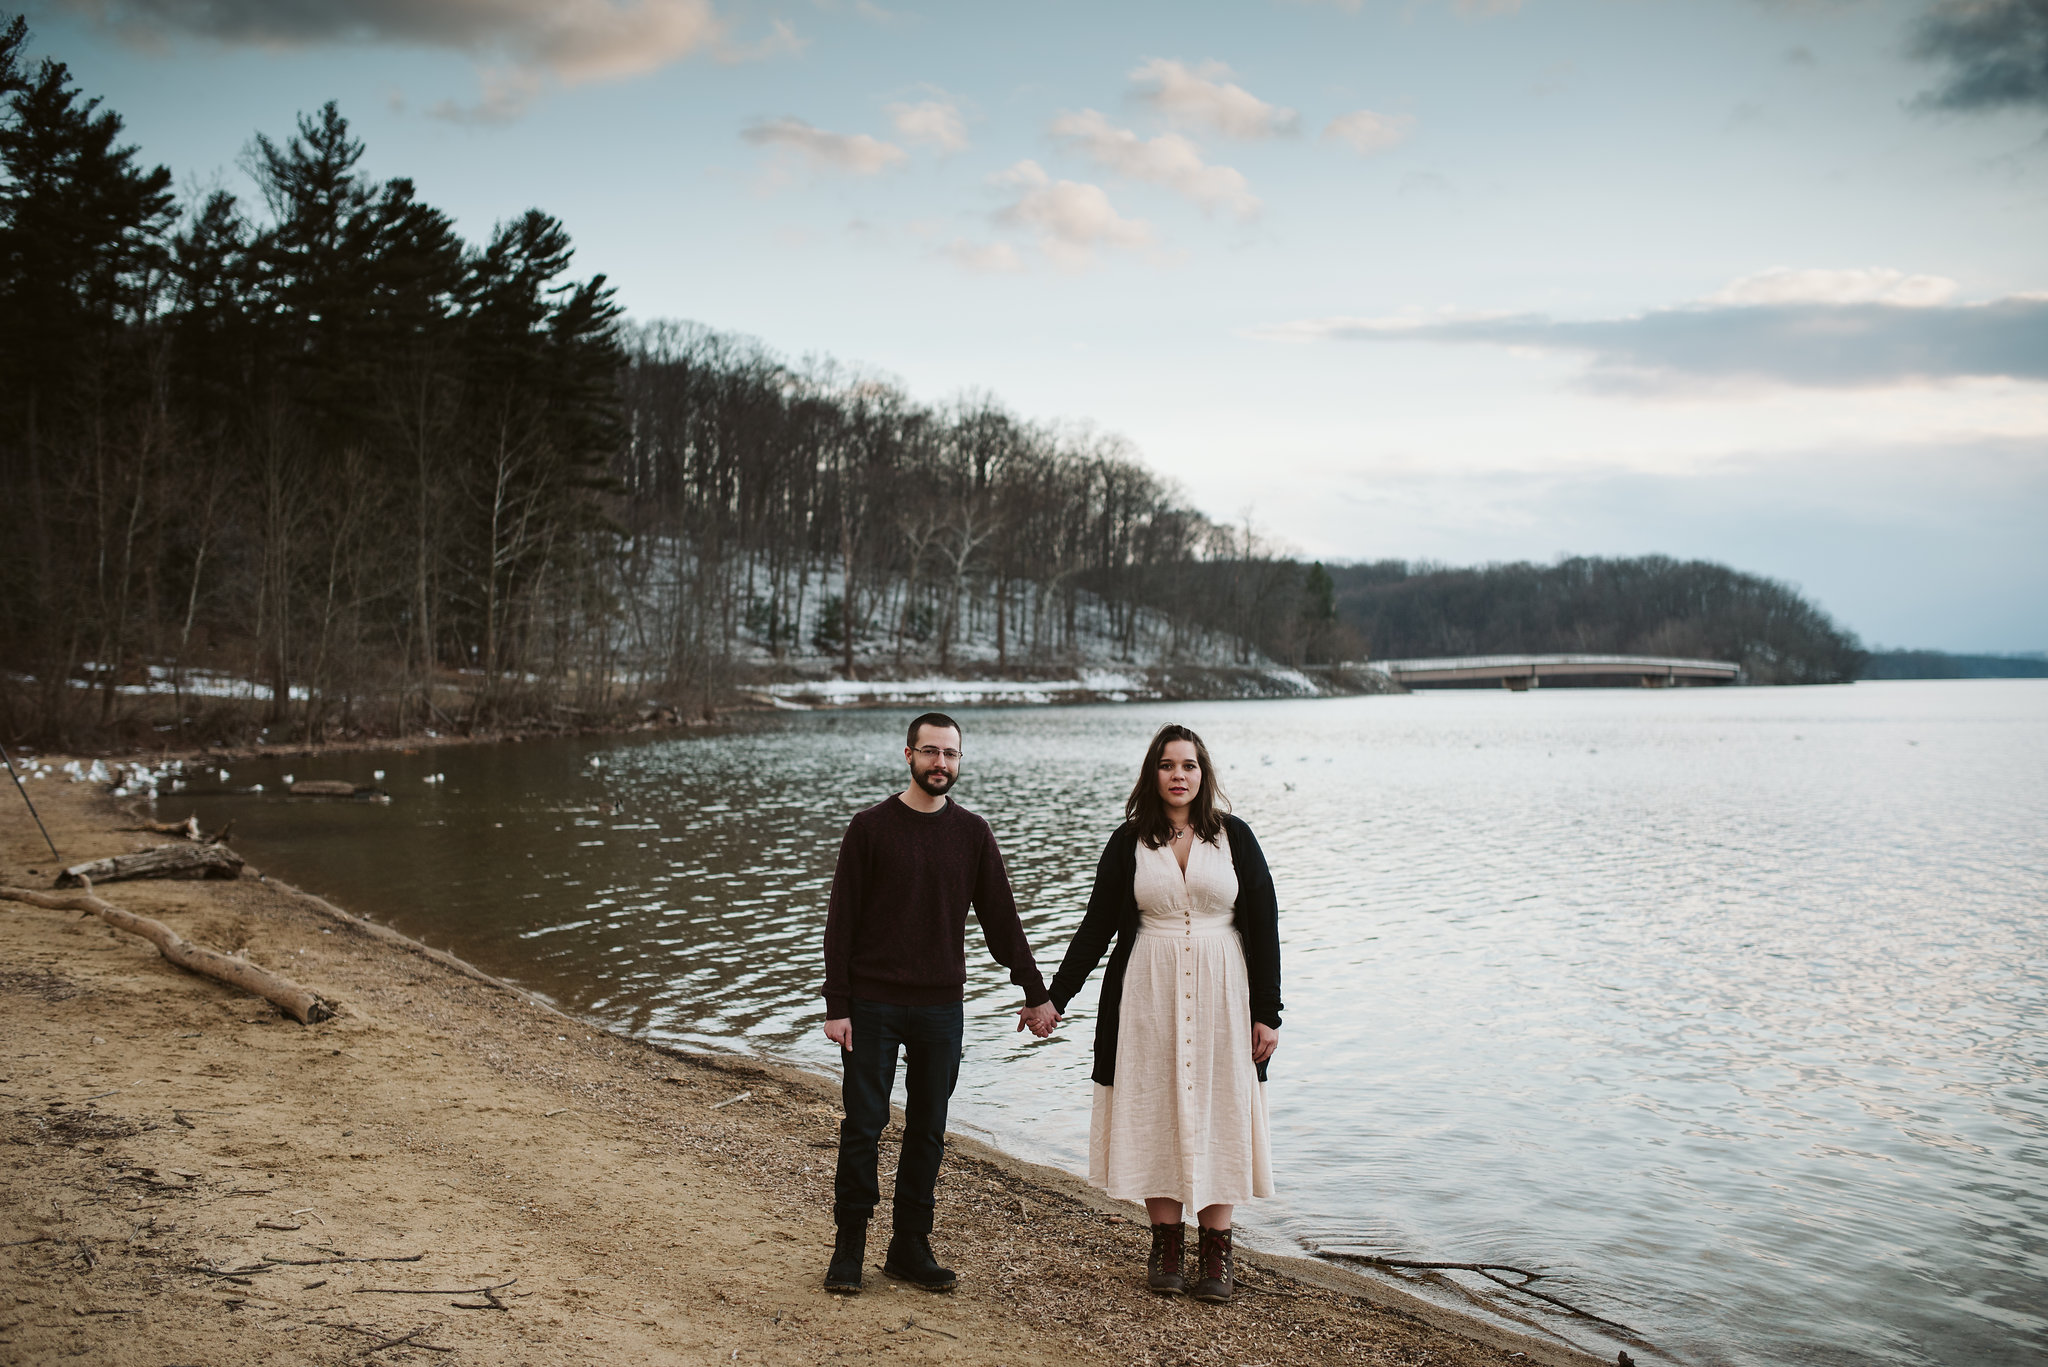  Baltimore County, Loch Raven Reservoir, Maryland Wedding Photographer, Winter, Engagement Photos, Nature, Romantic, Classic, Bride and Groom Holding Hands Next to Water, Casual and Sweet, Rustic 